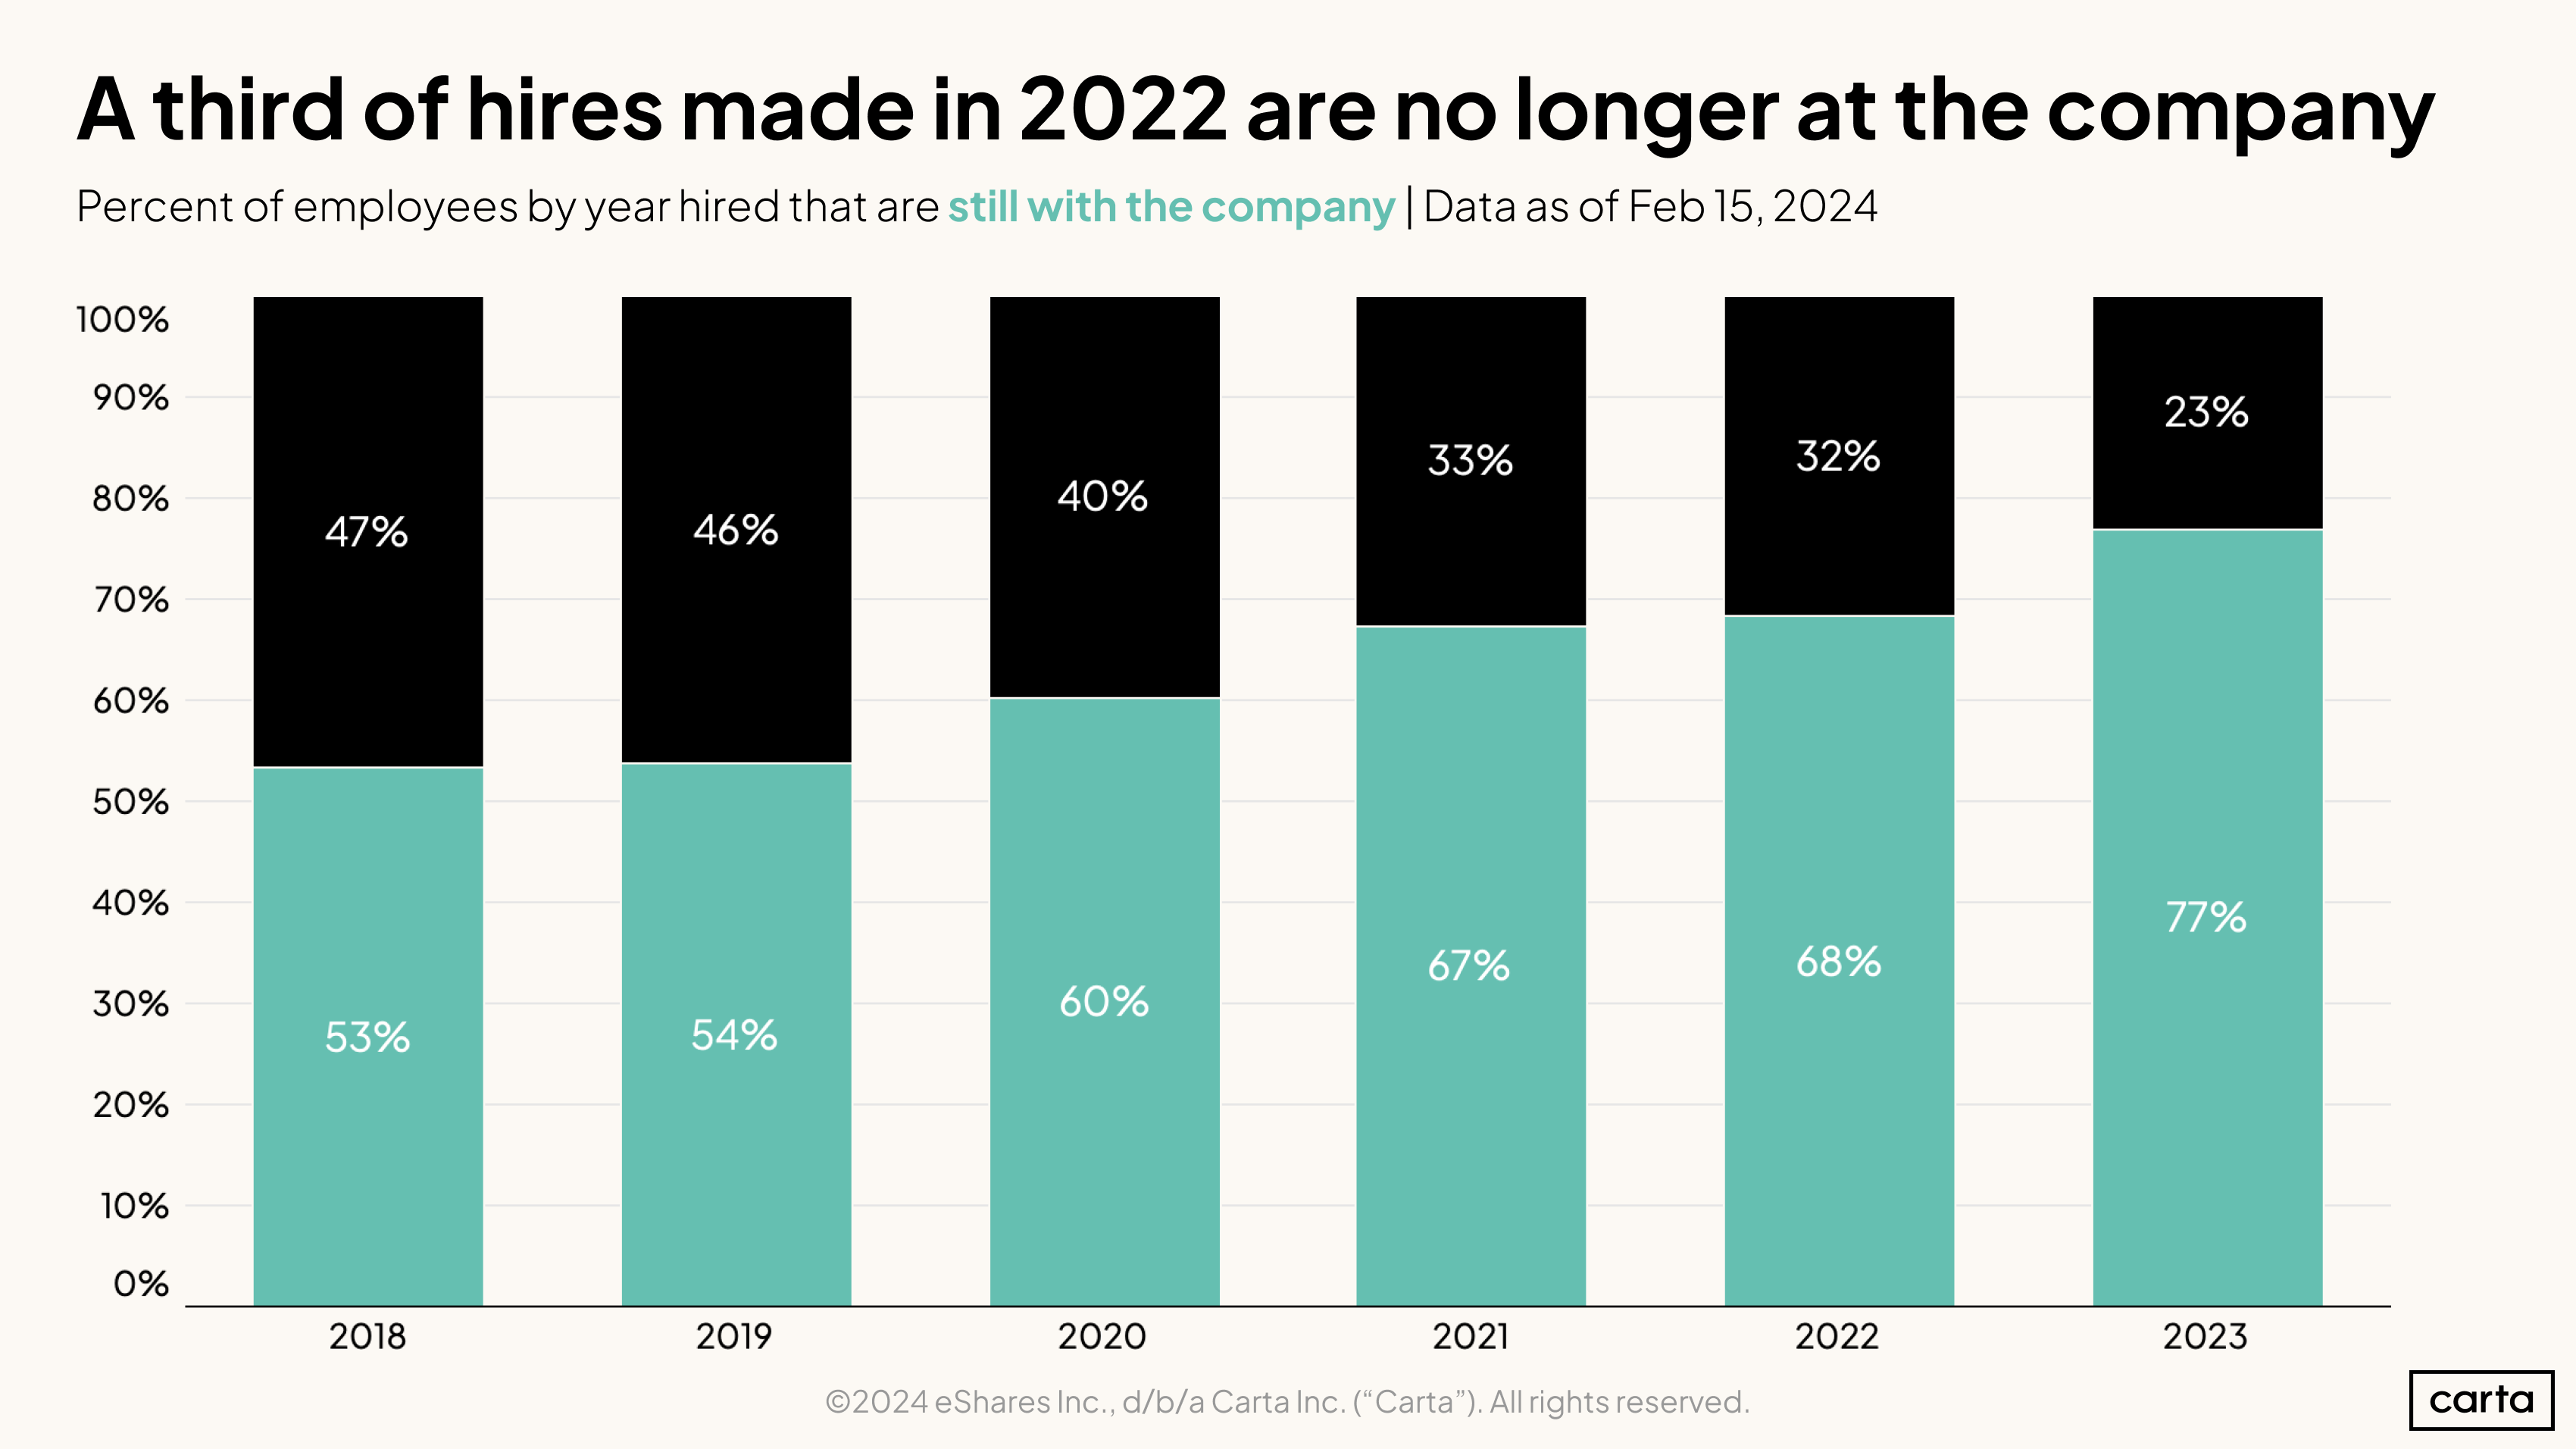 A third of hires made in 2022 are no longer at the company